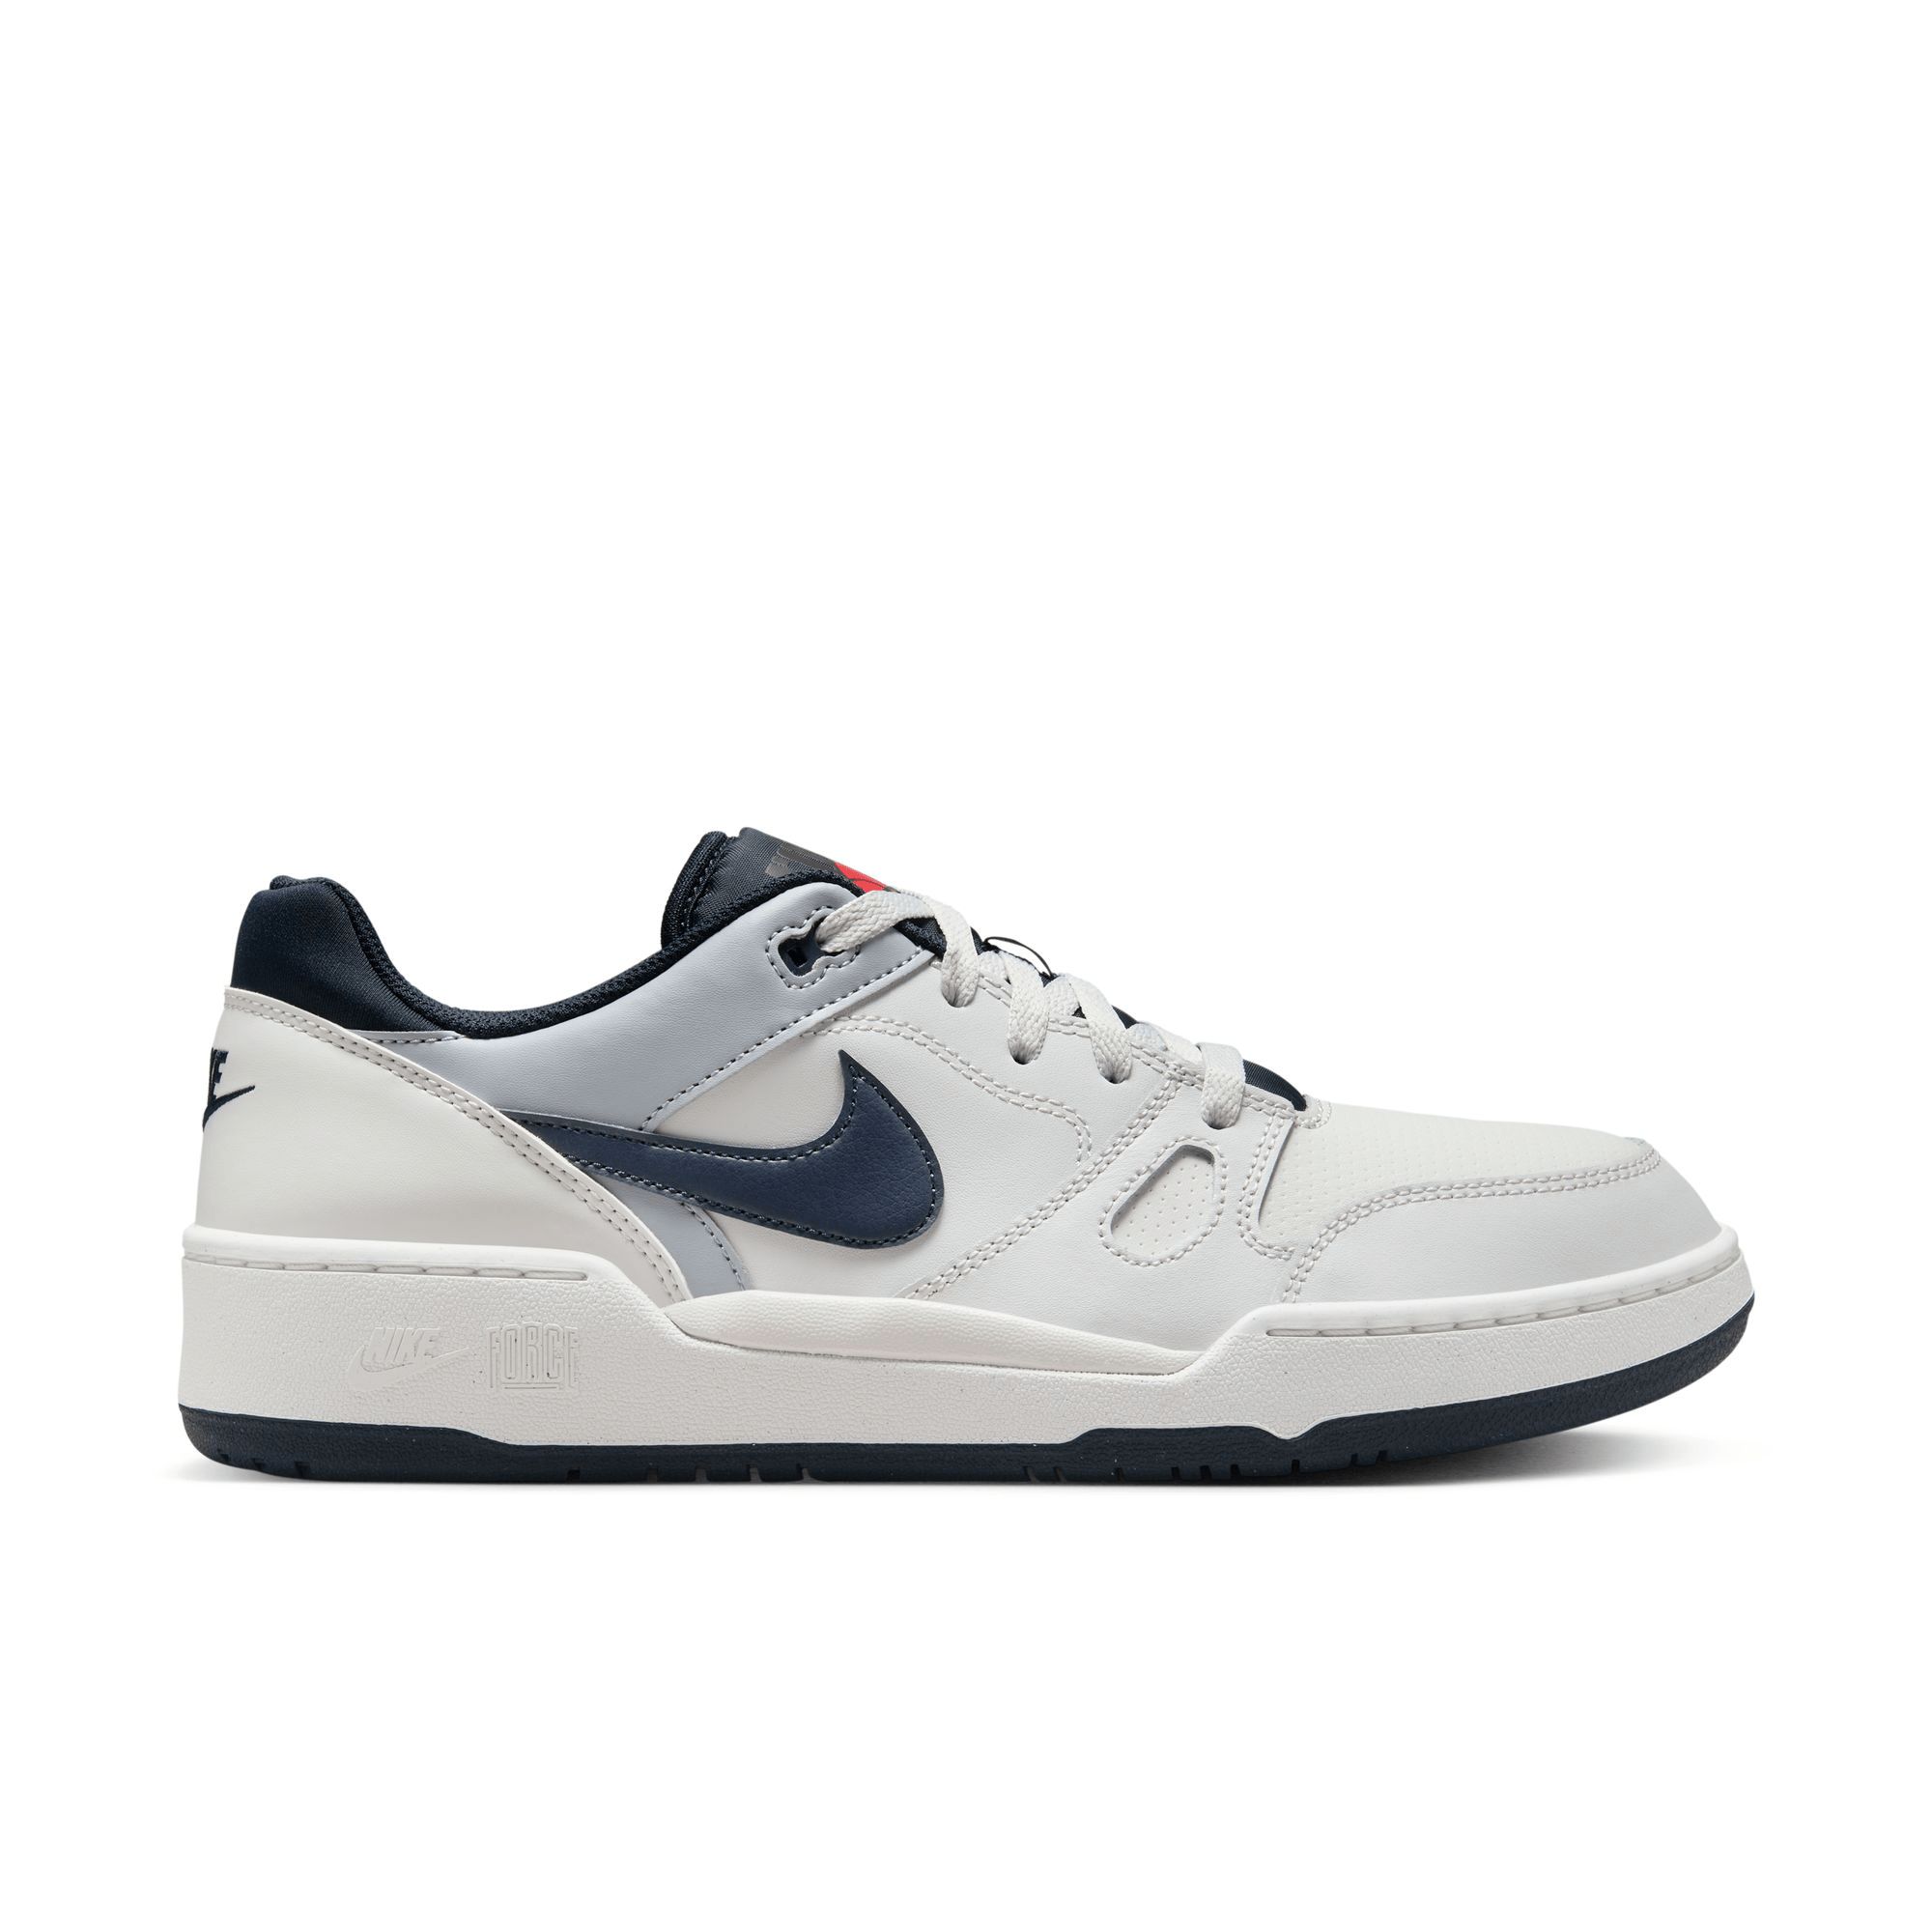 Image of Nike Men's Full Force Low Casual Shoes Sneakers